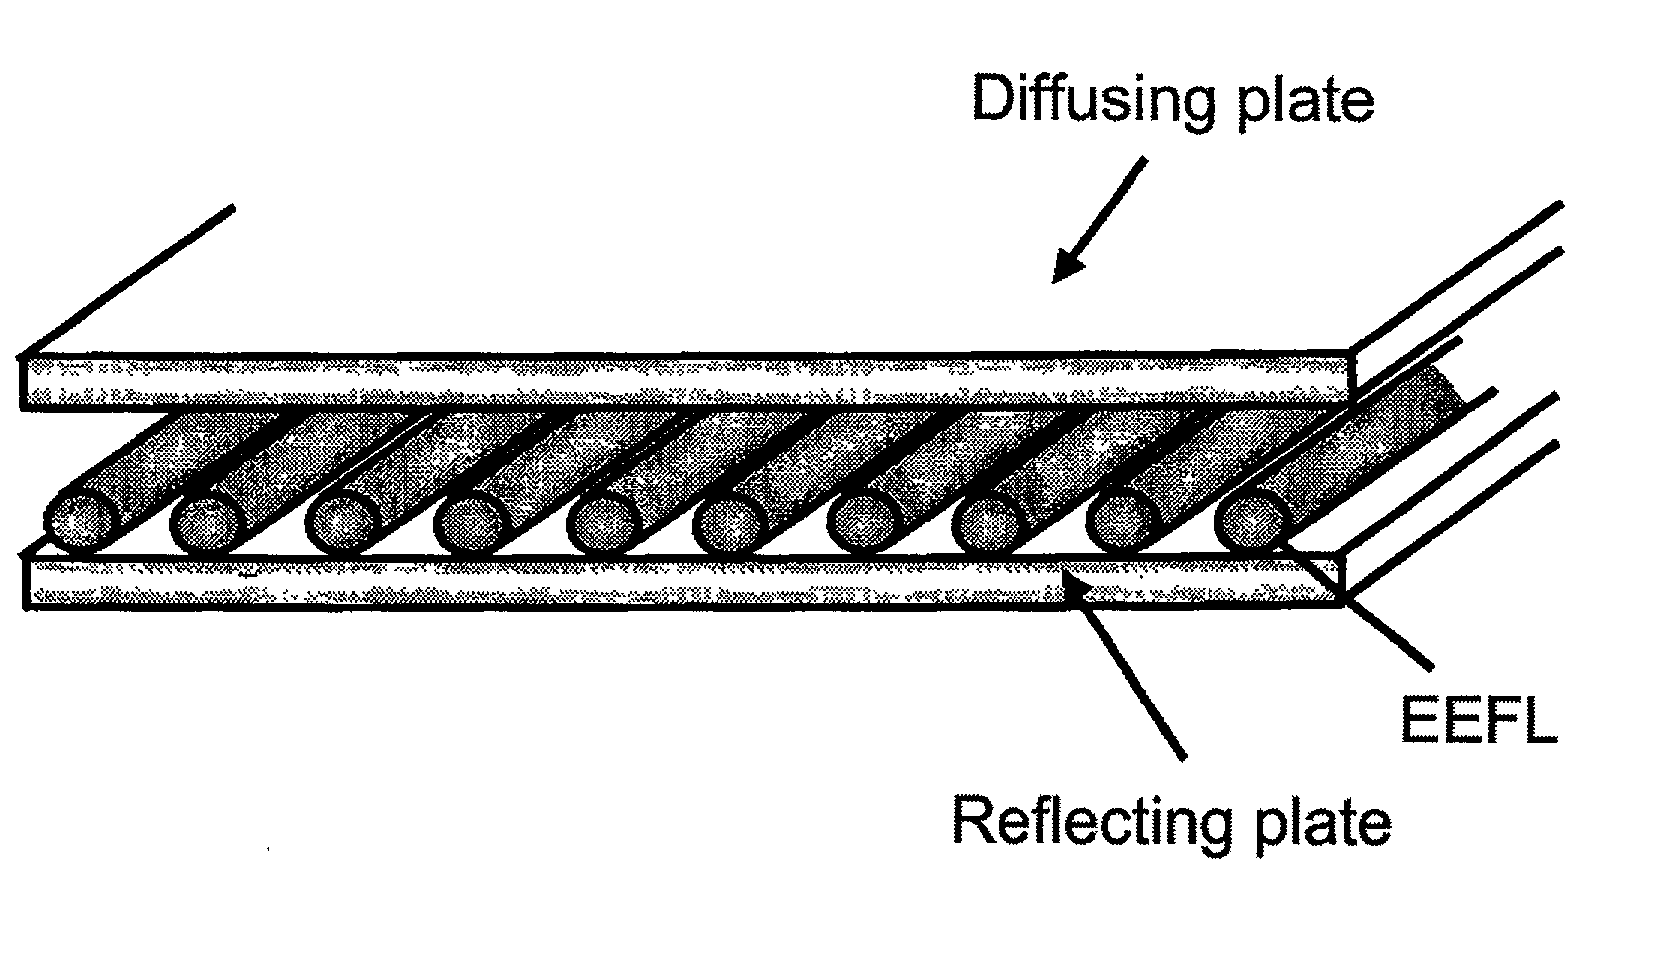 Backlight including external electrode fluorescent lamp and method for driving the same